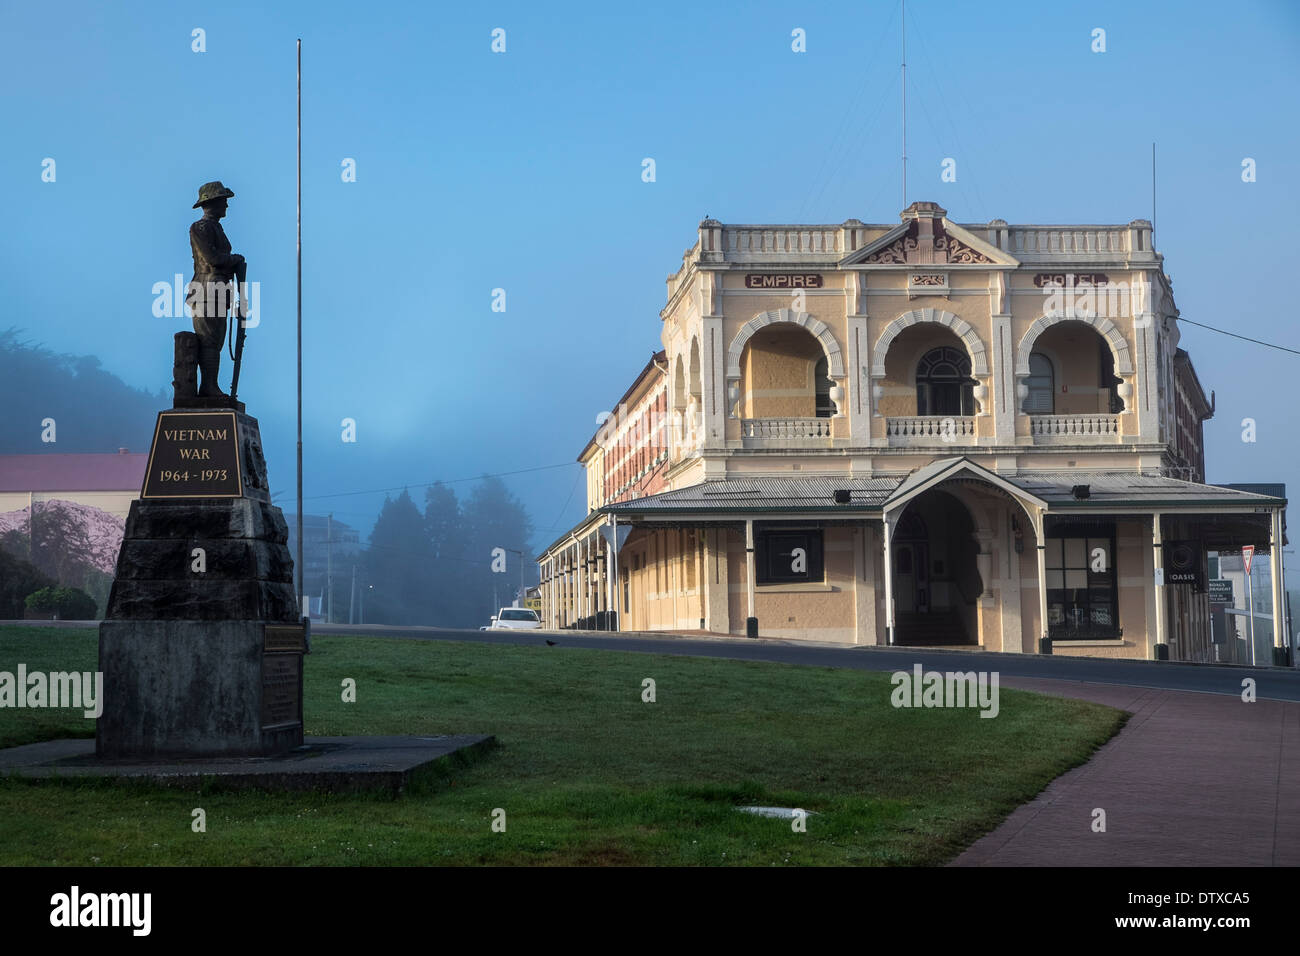 The Imperial Hotel and Anzac monument in Queenstown, Tasmania Stock Photo